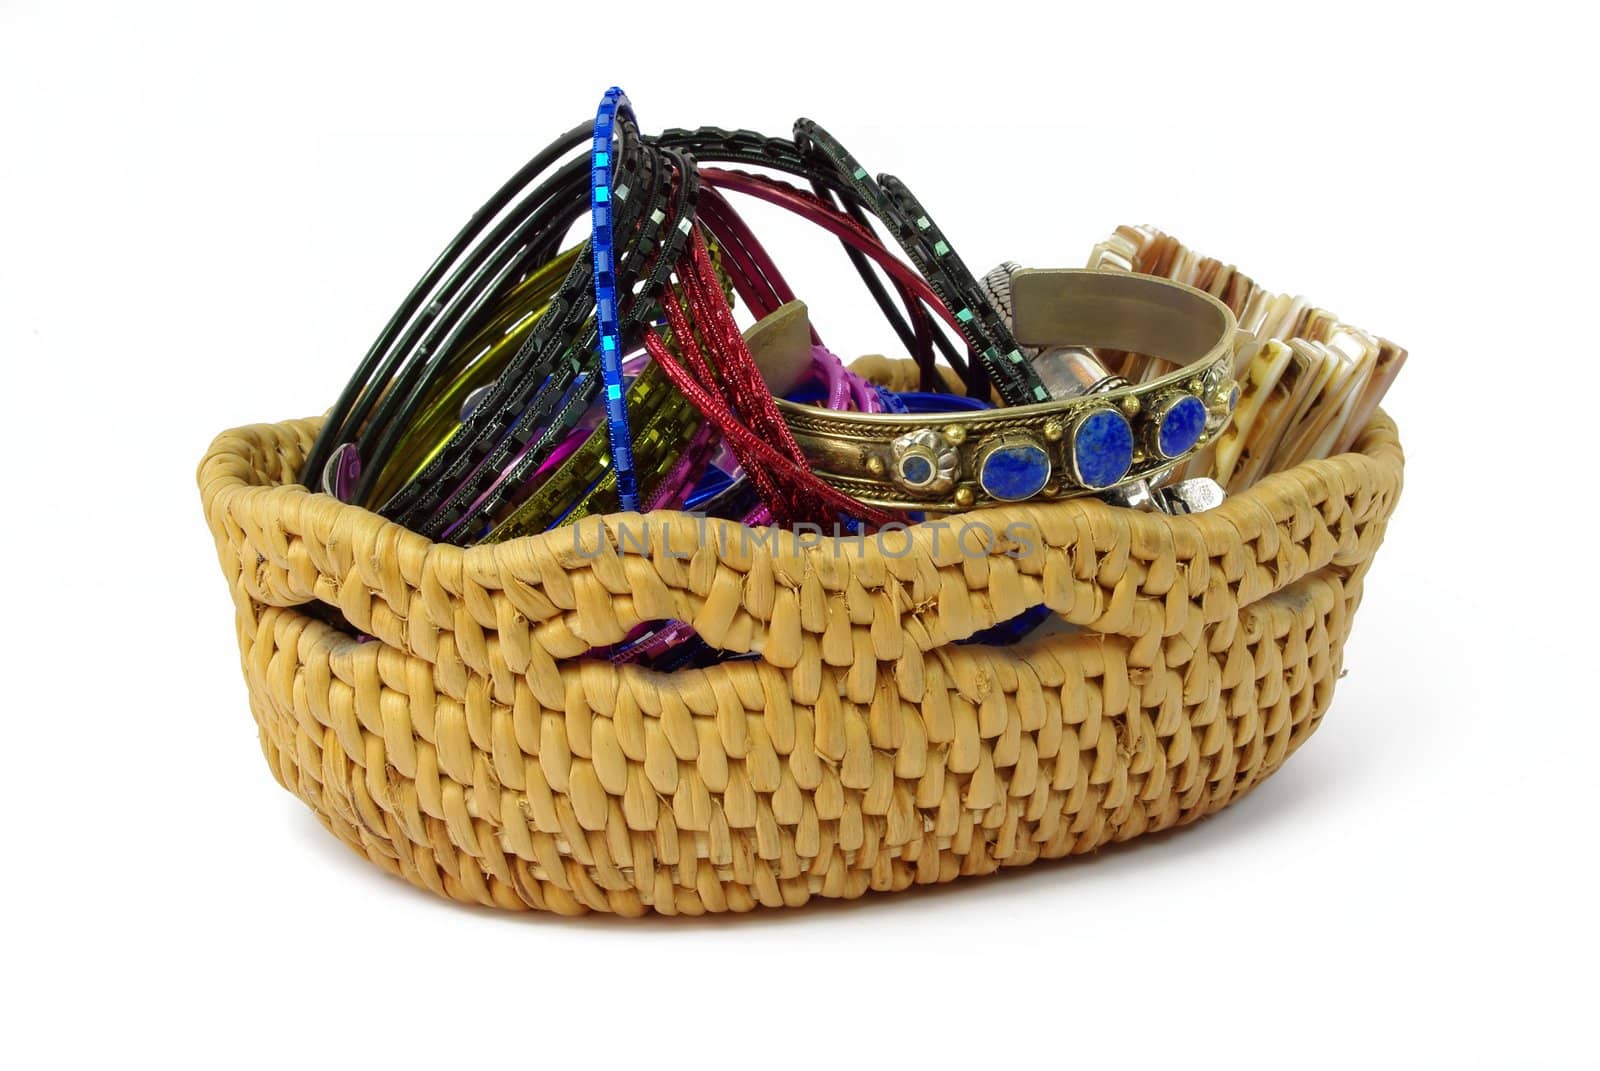 Wicker case with jewelry beads and bracelets